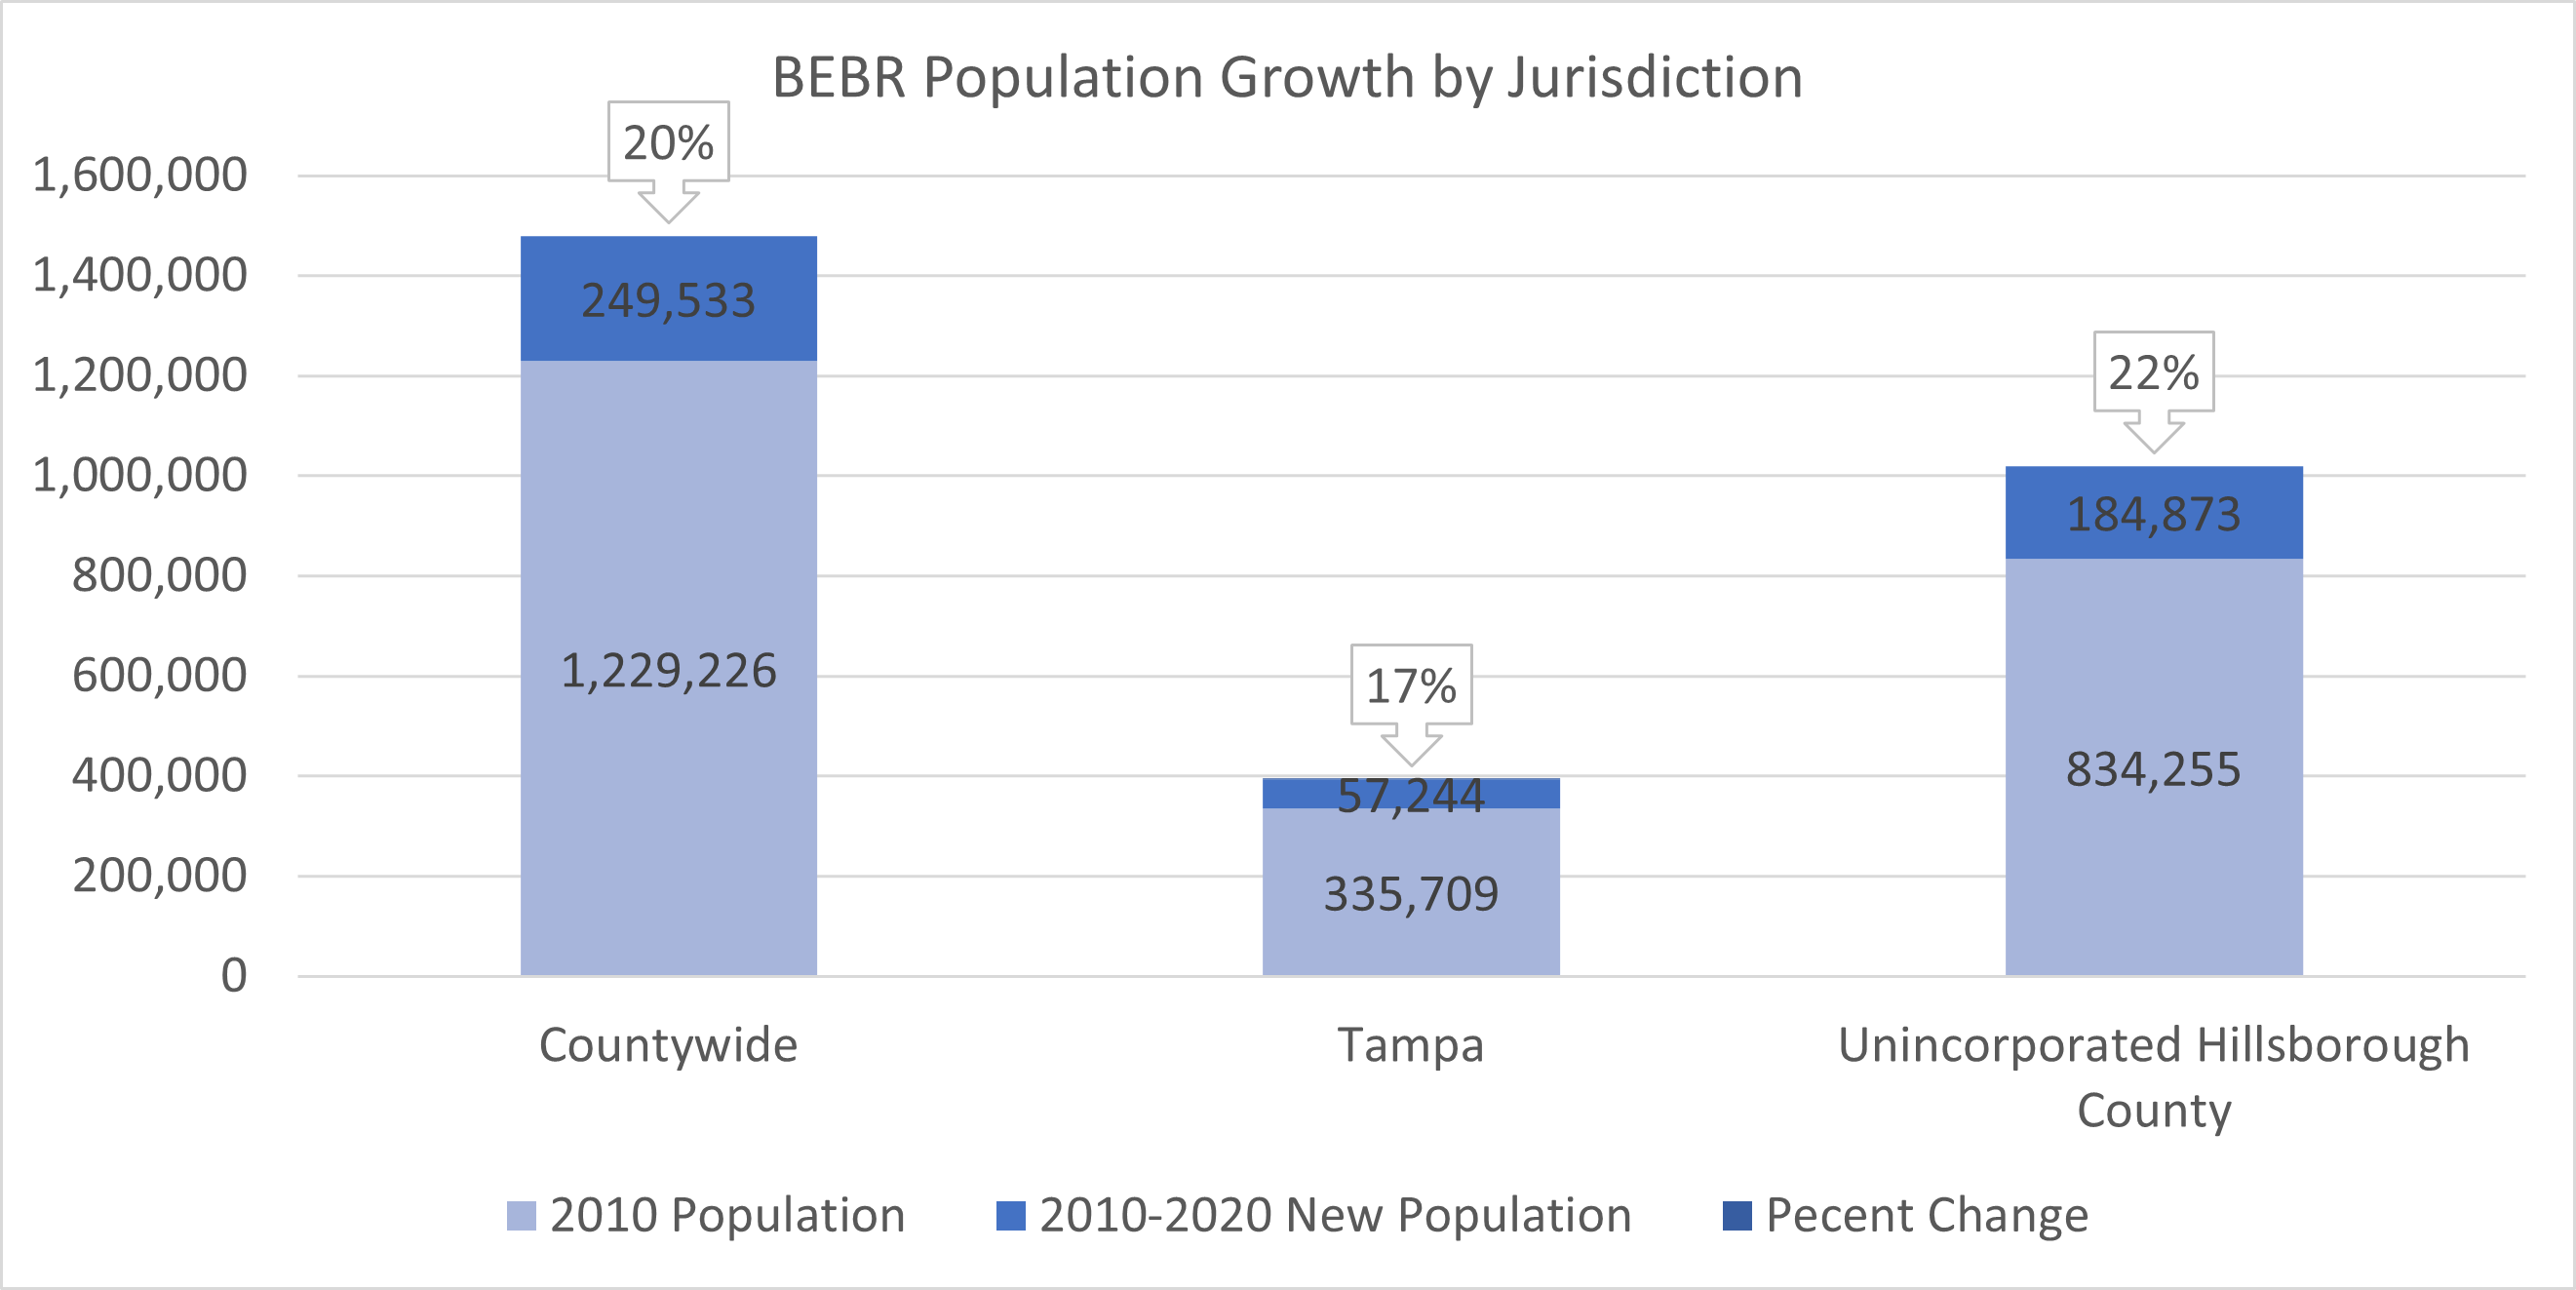 Chart shows 2010-2020 BEBR population growth for Countywide, Tampa, and Unincorporated Hillsborough County.  From 2010 to 2020, Countywide grew 249,533 (20% higher), and Tampa grew 57,244 (17%), and Unincorporated Hillsborough County  grew 184,873 (22%).